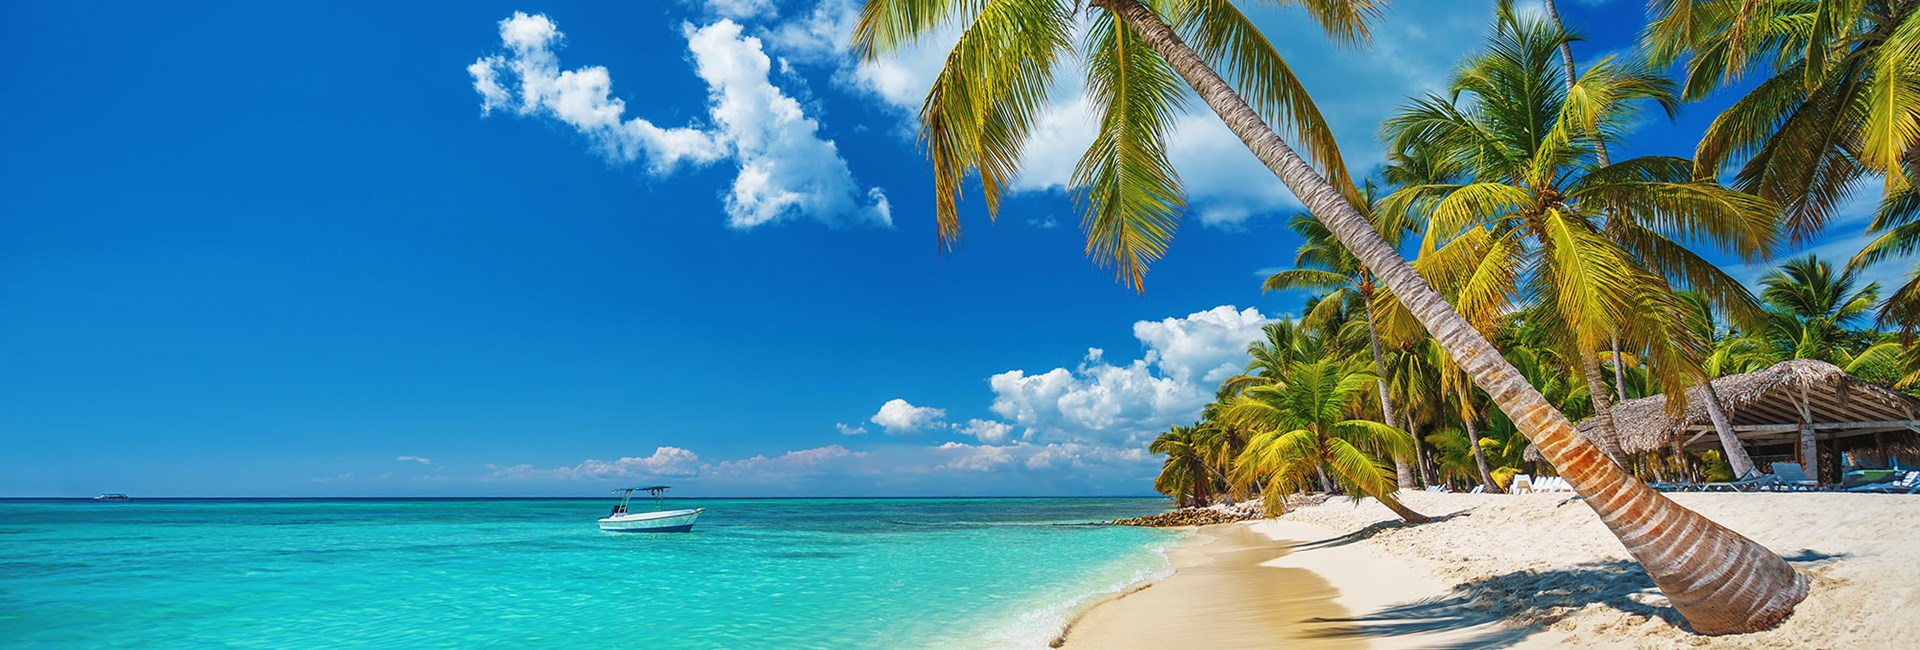 Beautiful tropical beach with azure sea, white sand, palms and blue skies